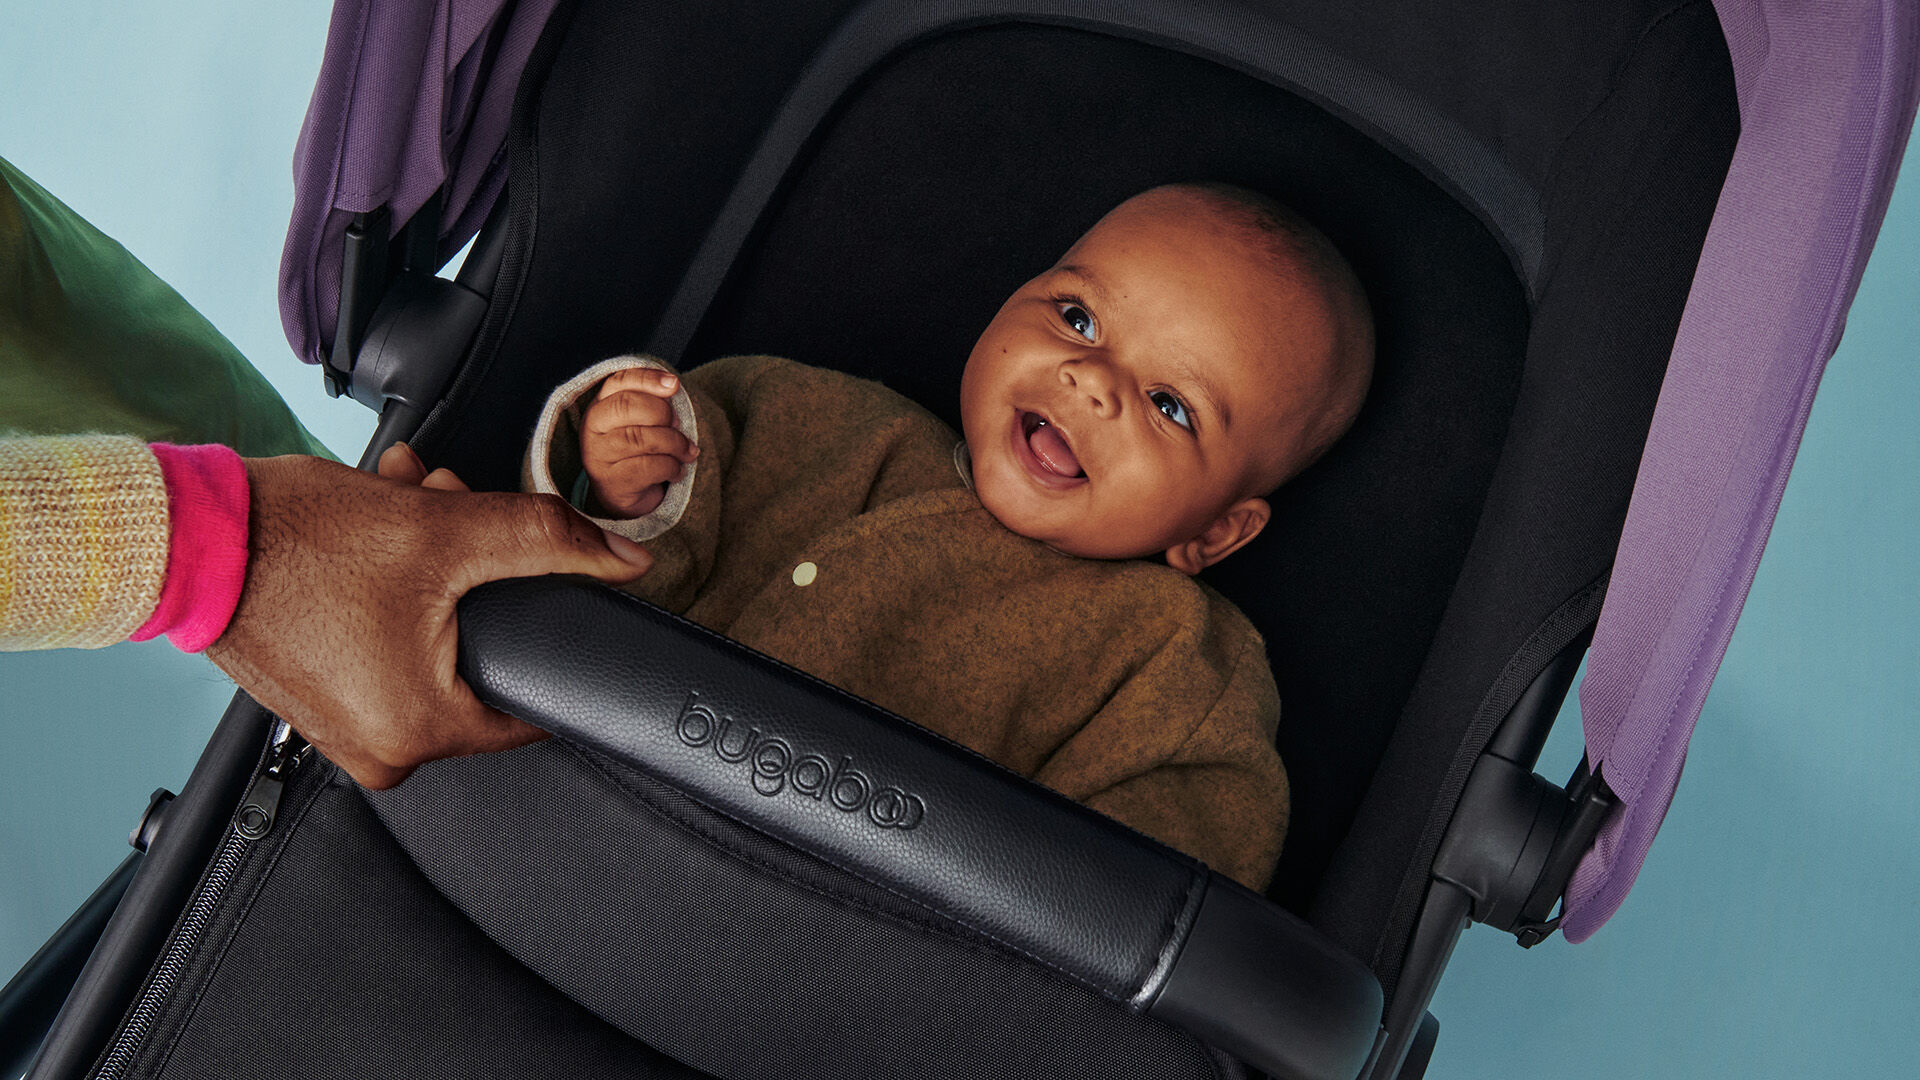 Baby smiling inside a Bugaboo carrycot.